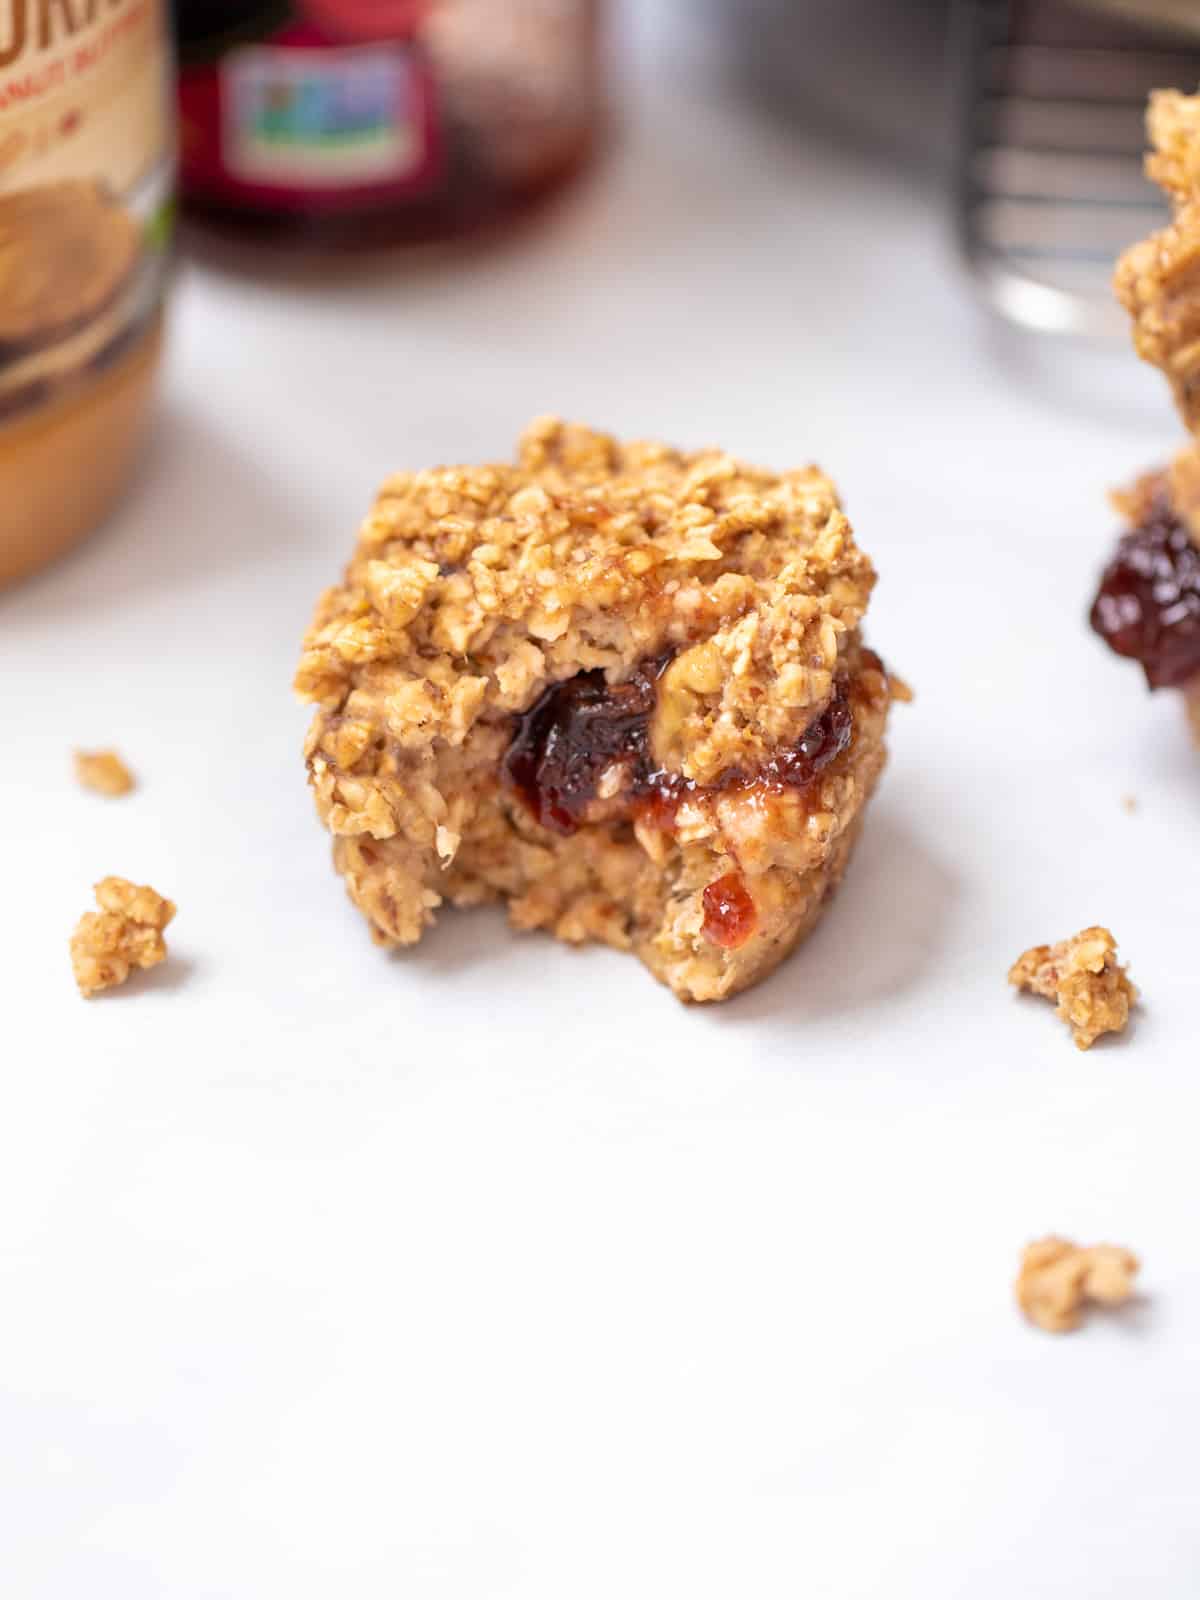 Baked Oatmeal Cup showing jelly coming out of center of muffin.